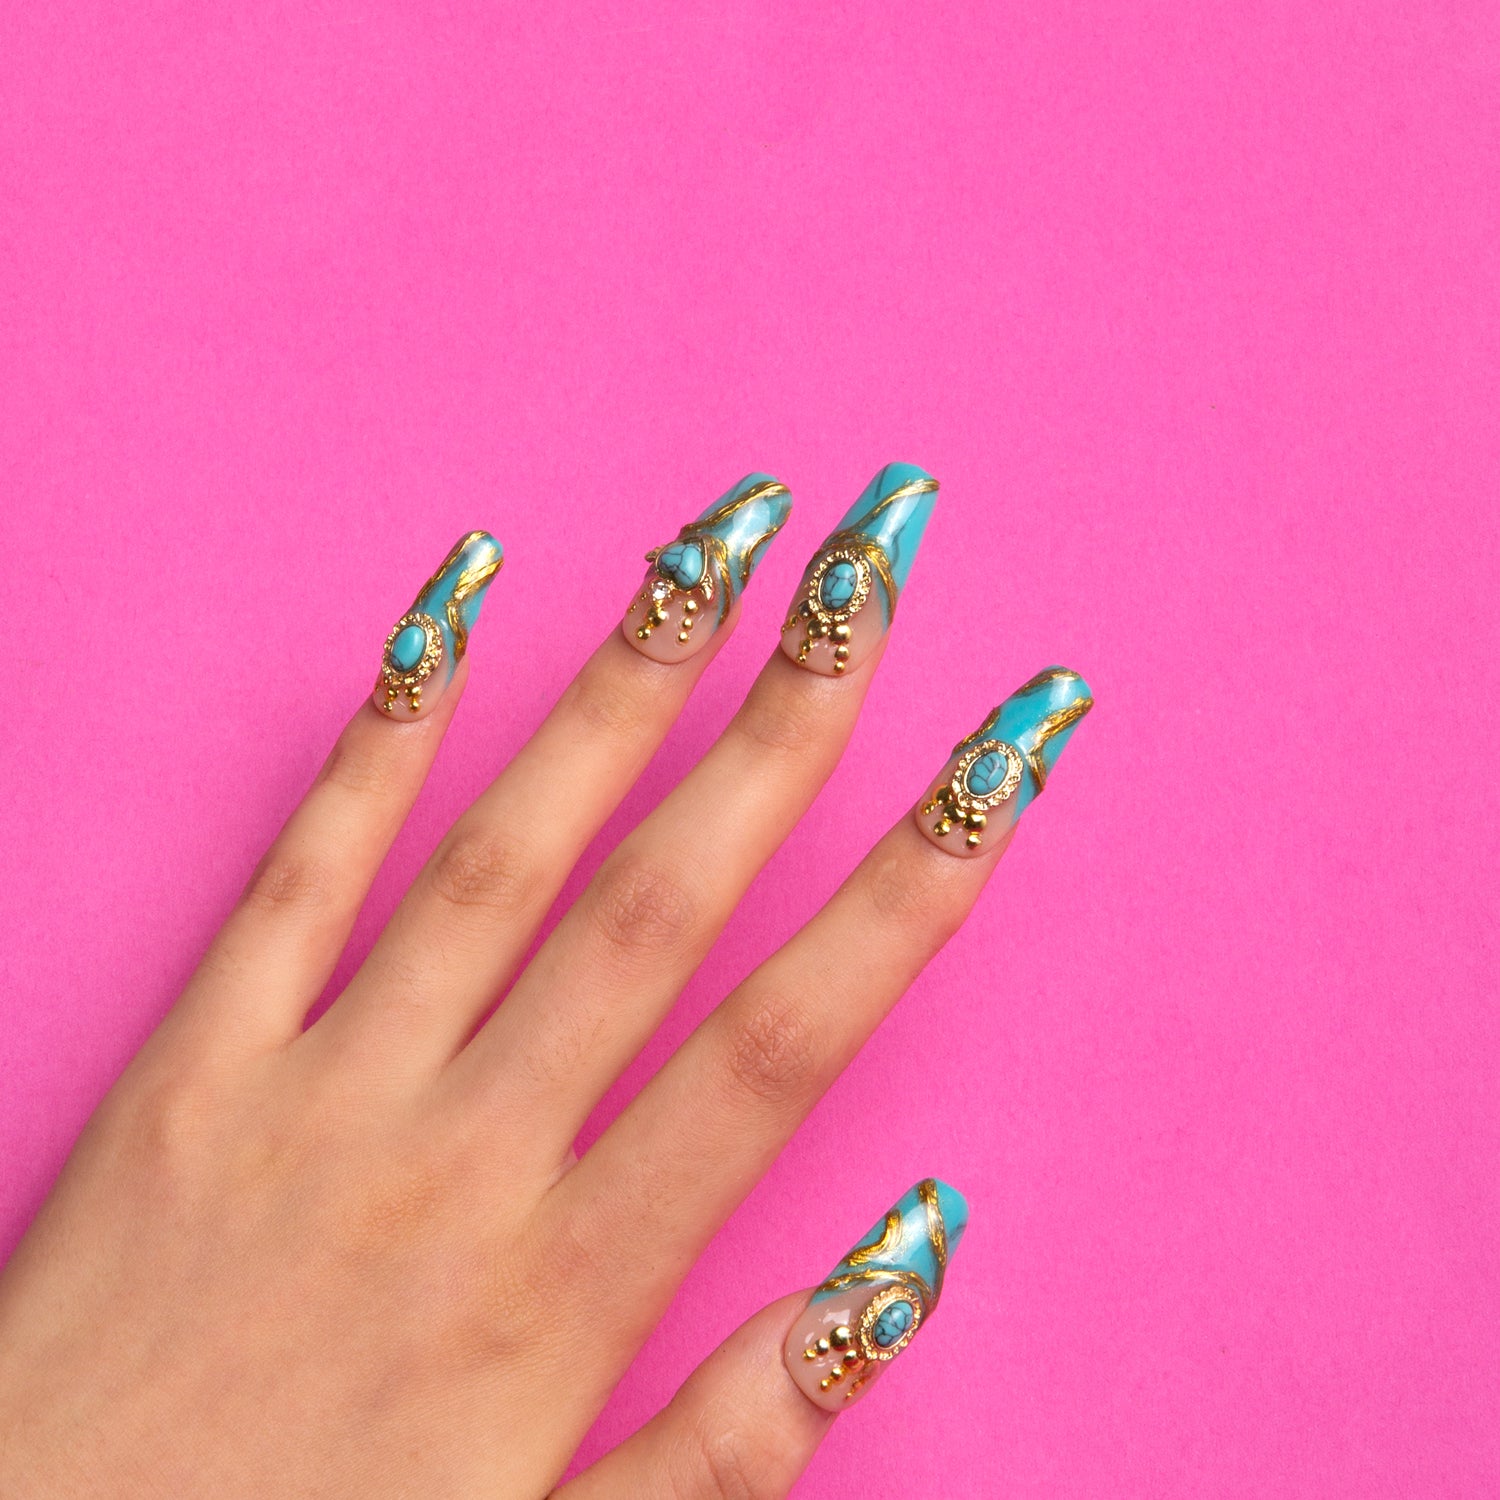 Hand model displaying luxurious turquoise coffin-shaped press-on nails adorned with golden decor and sparkling gems against a pink background.